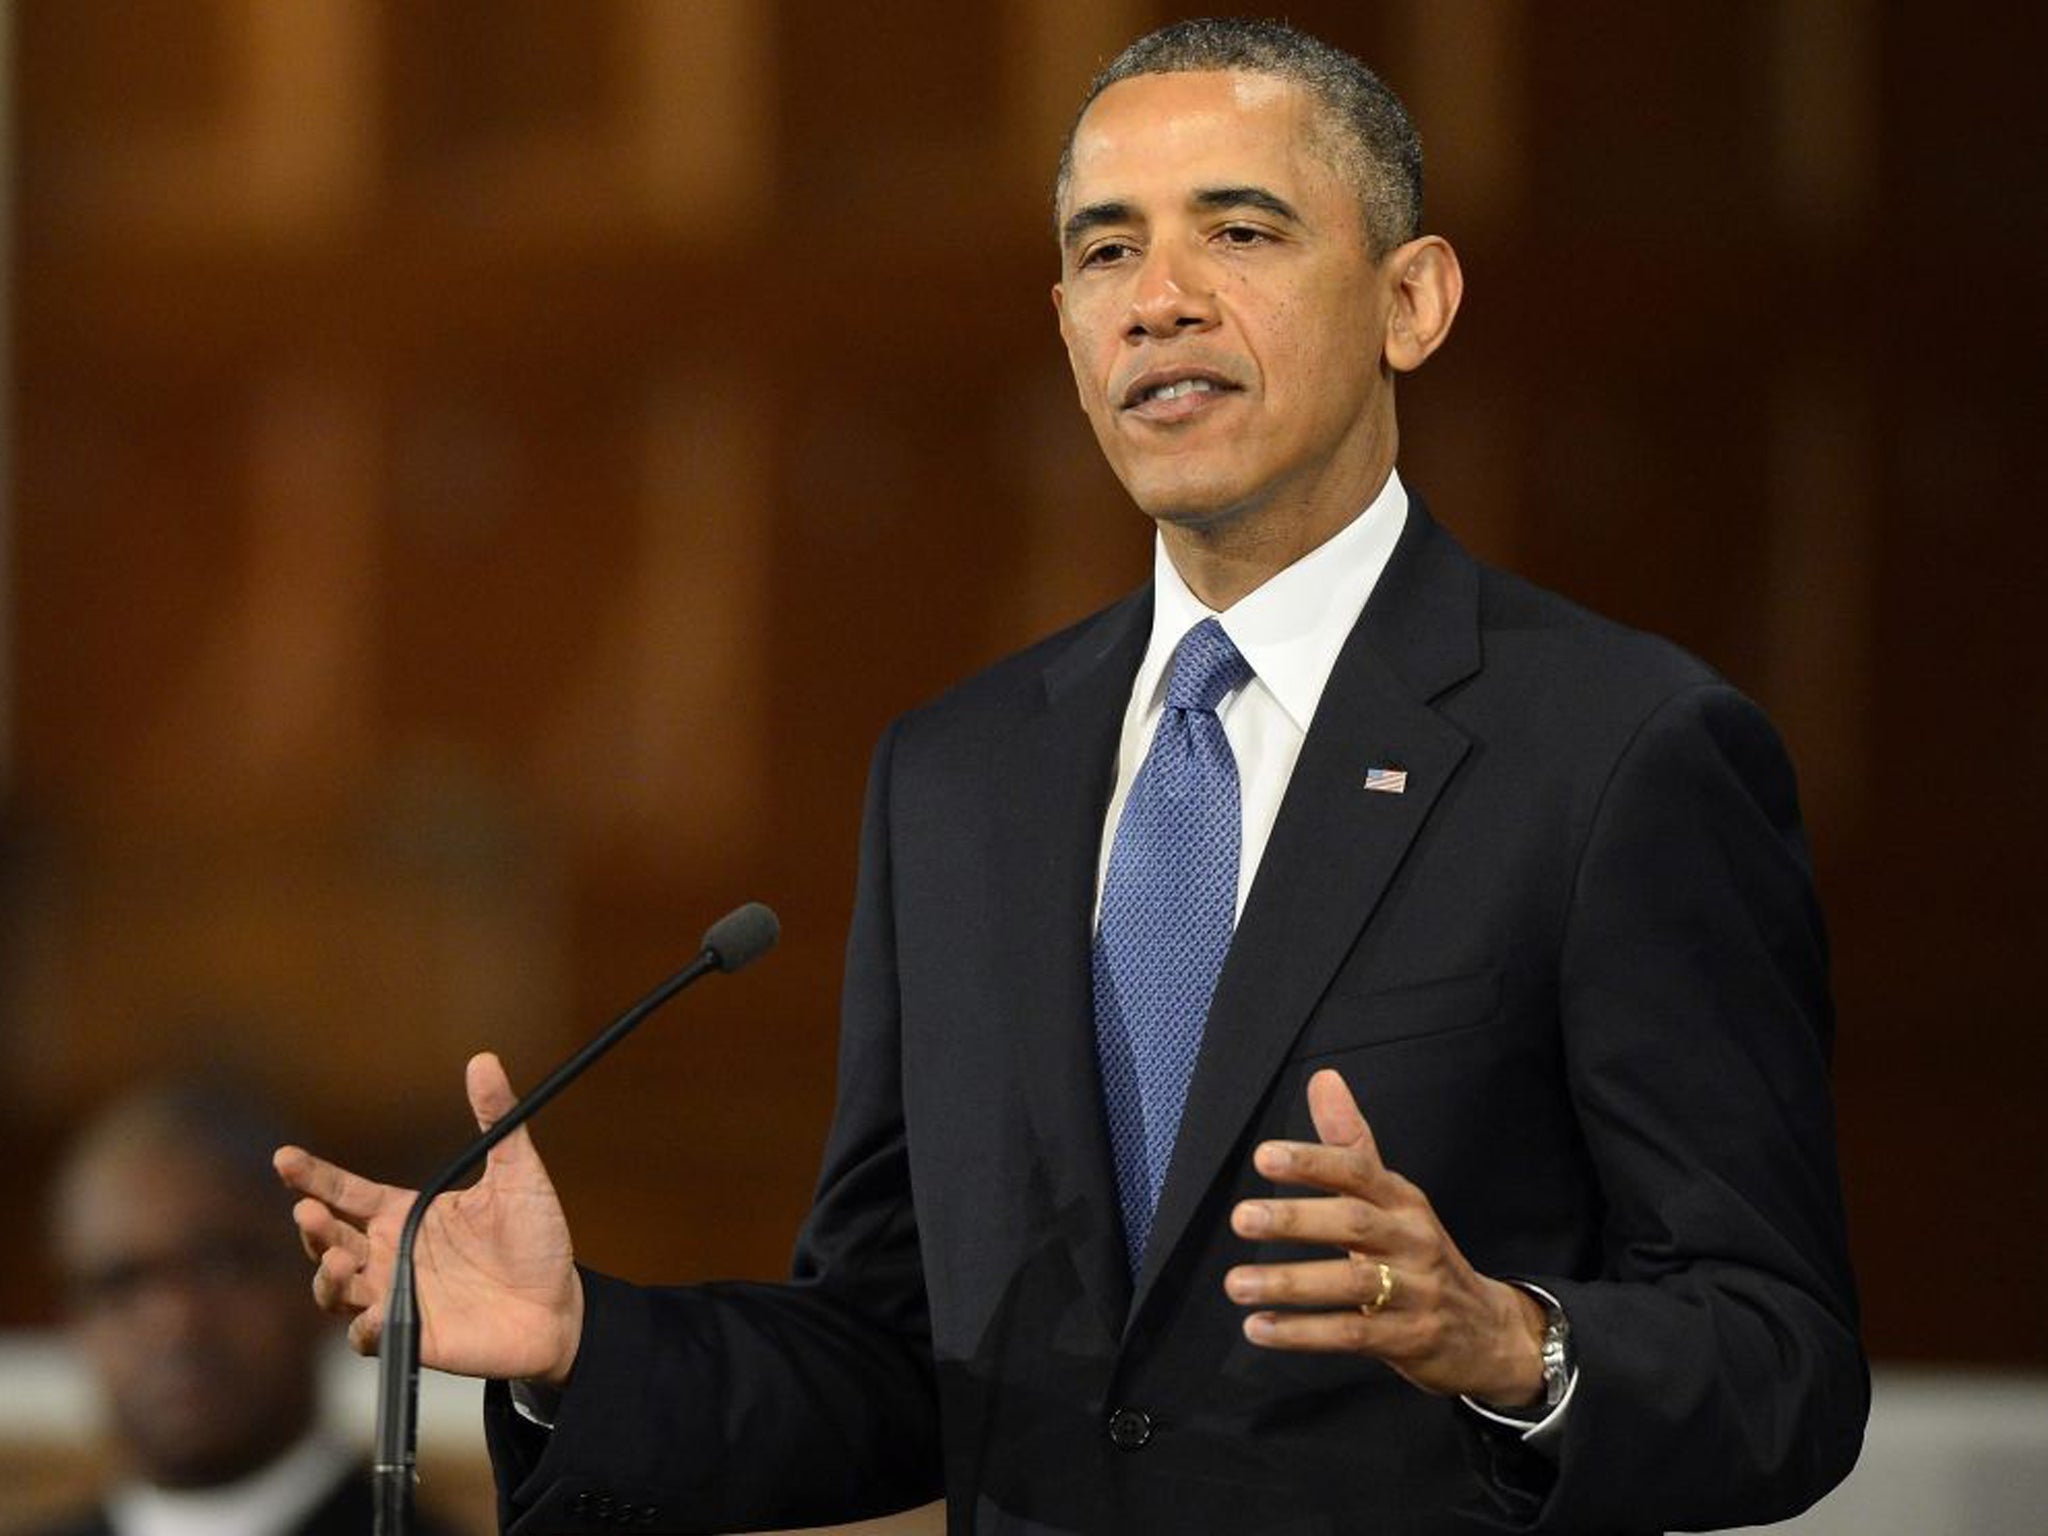 President Obama speaking at a memorial service for victims of the Boston Marathon bombing